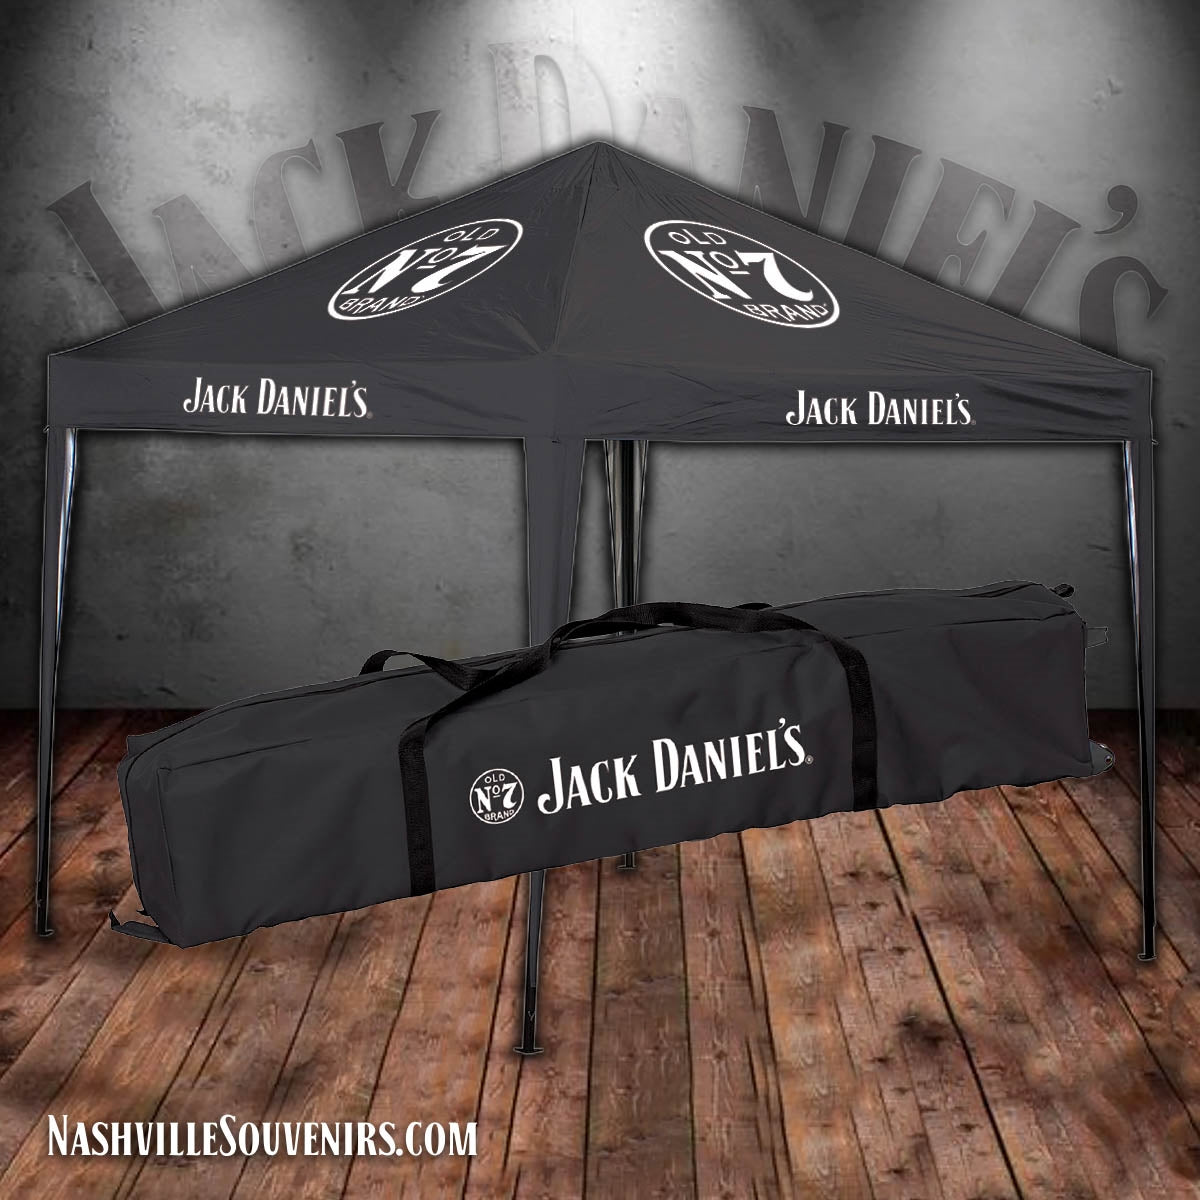 Get ready for summer, tailgating and all other fun events. This Jack Daniel's instant canopy provides shelter from the rain or sun. It features a very large Old No.7 Brand logo above Jack Daniel's logo on the side.